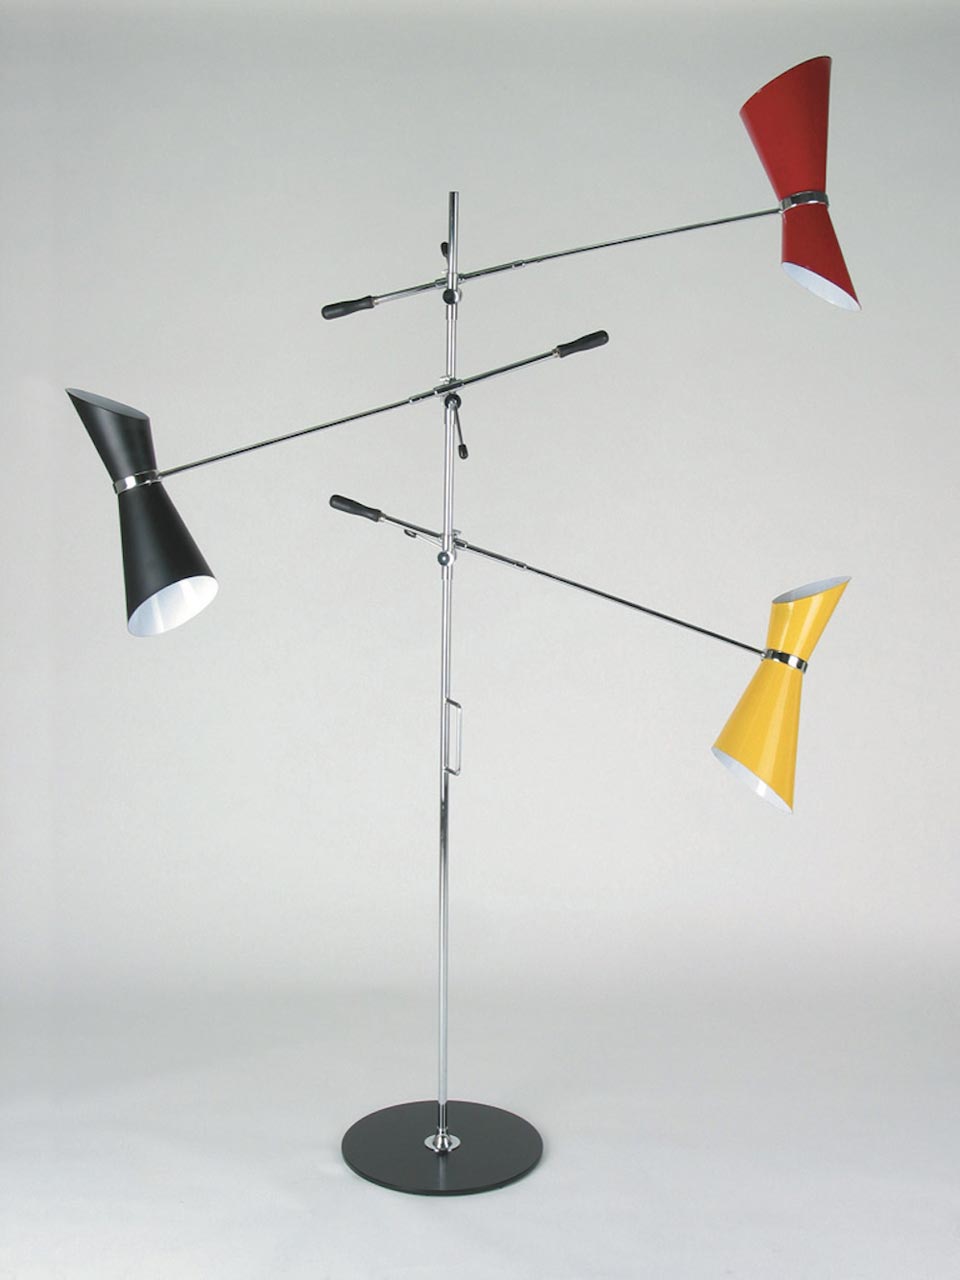 Stilnovo floor lamp three lights, red, yellow and black. Contract&More. 